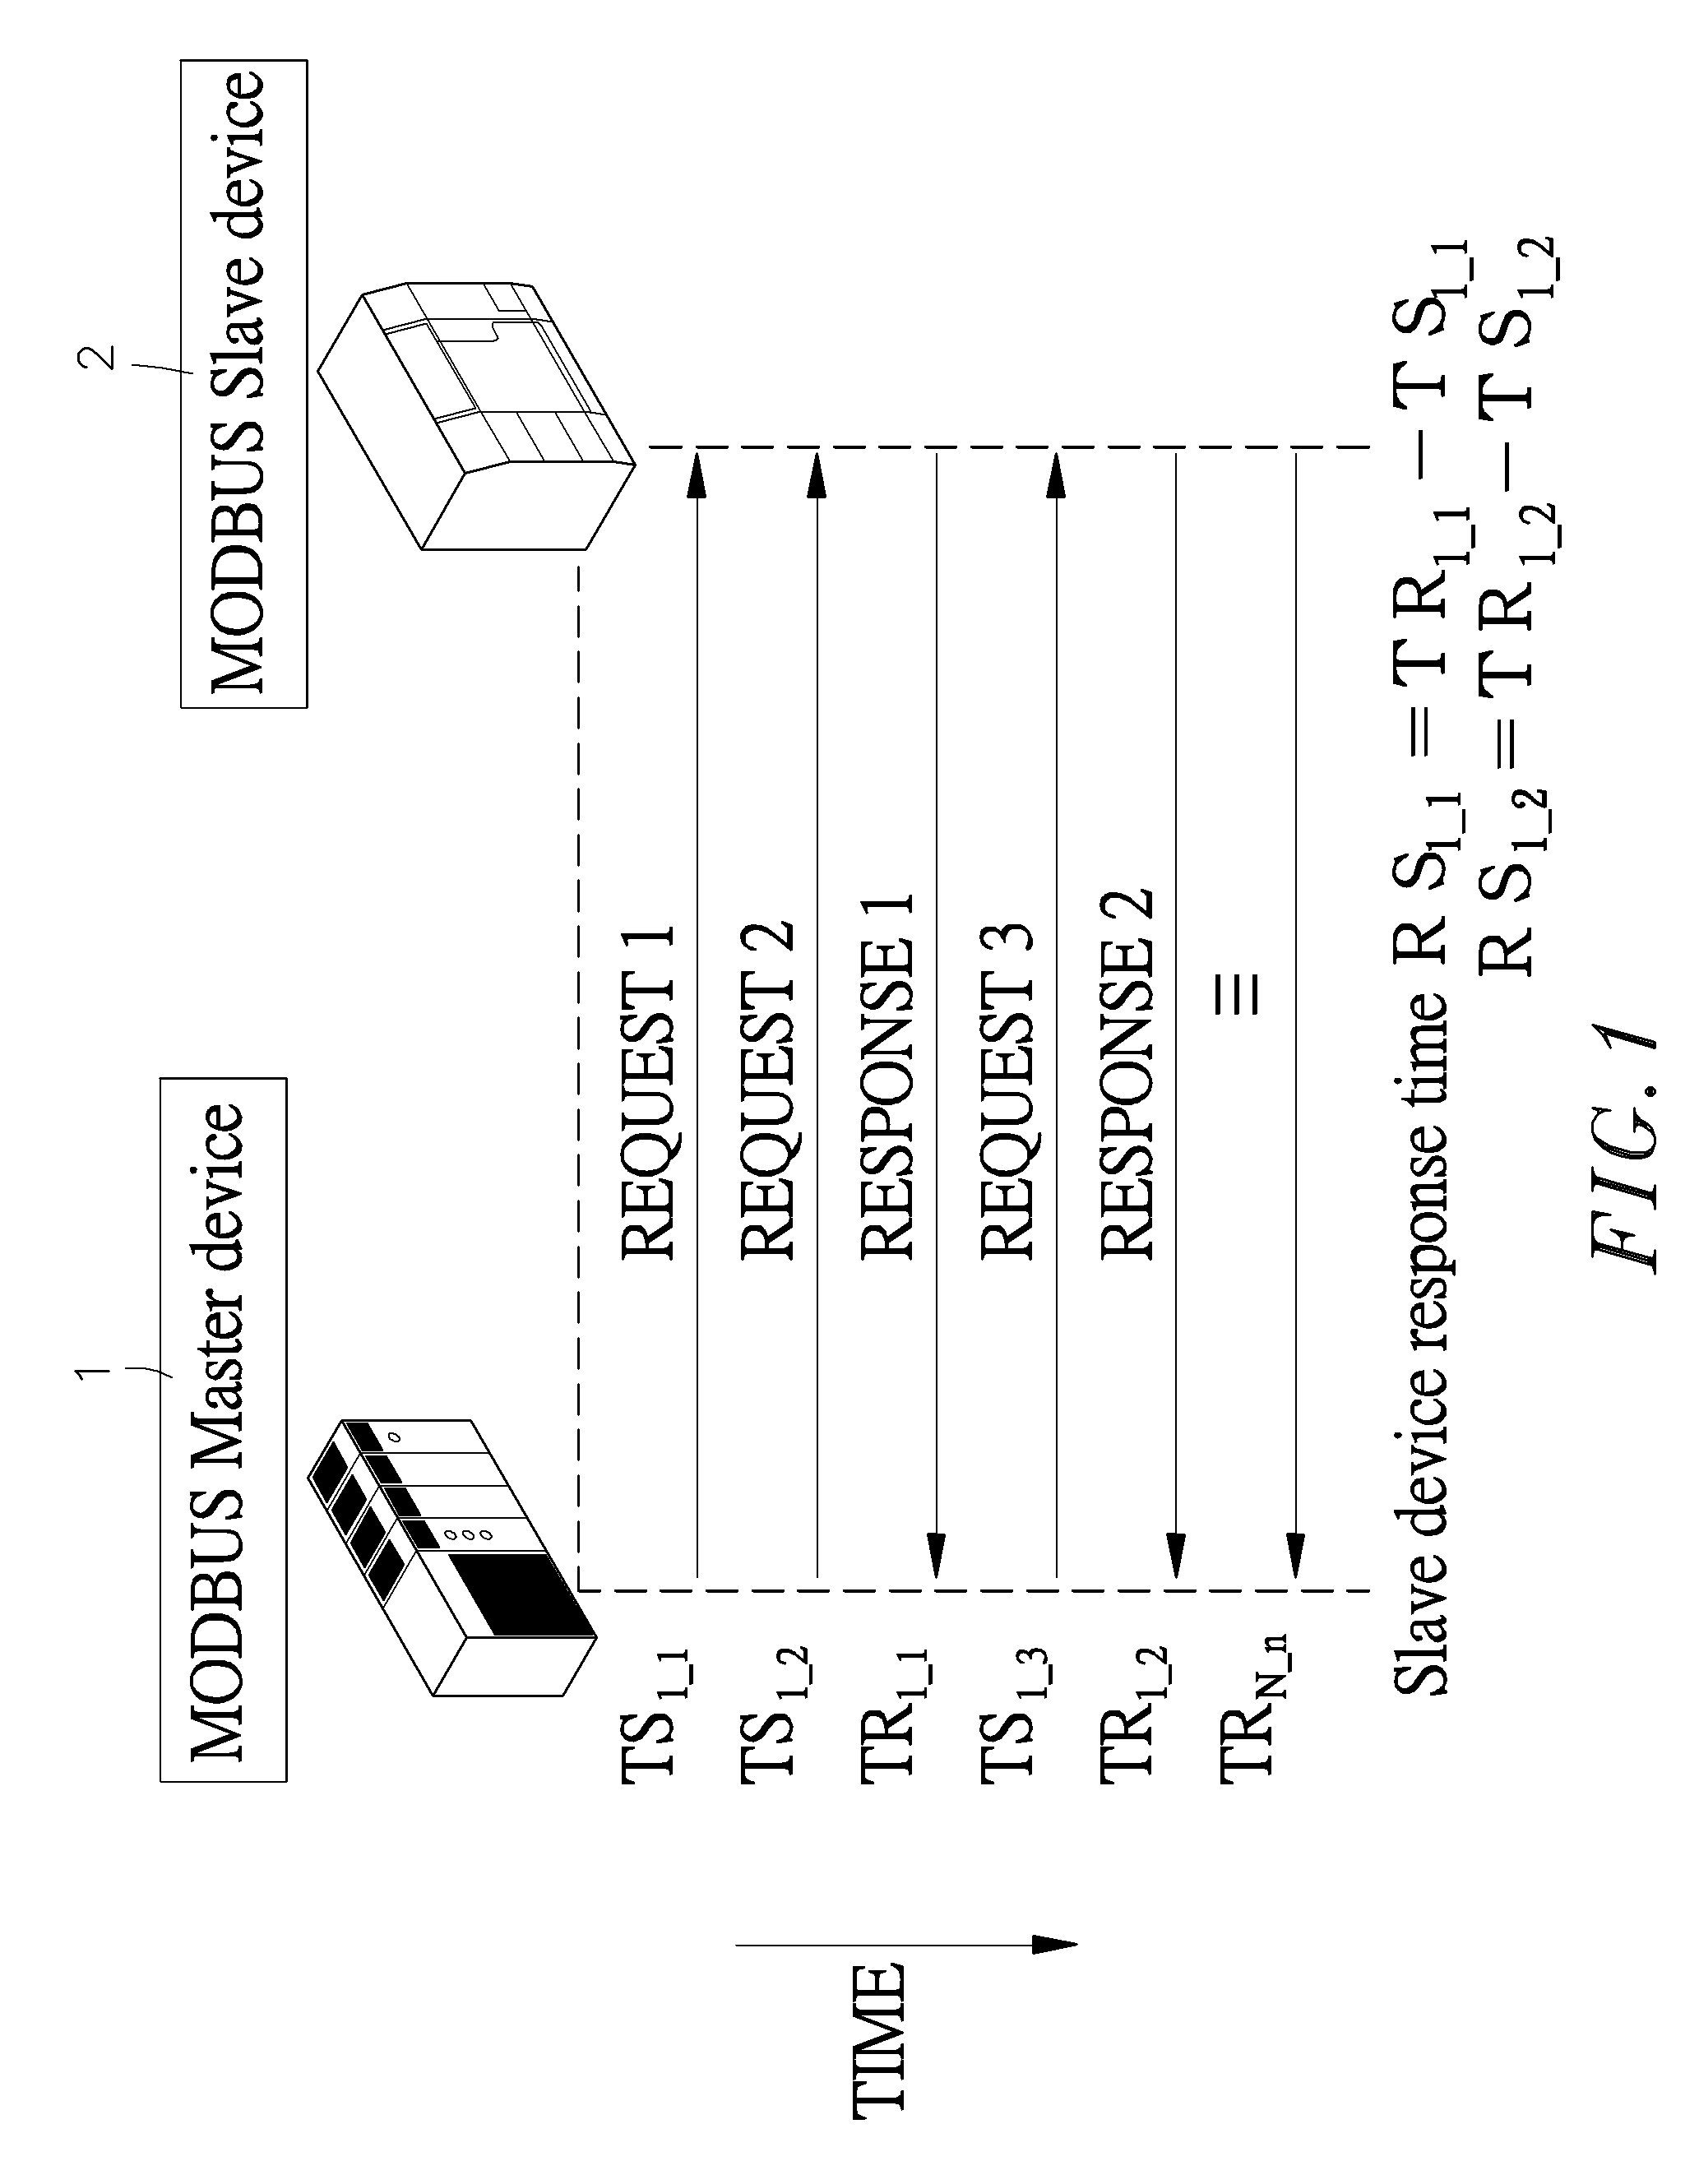 Method of detecting master/slave response time-out under continuous packet format communications protocol